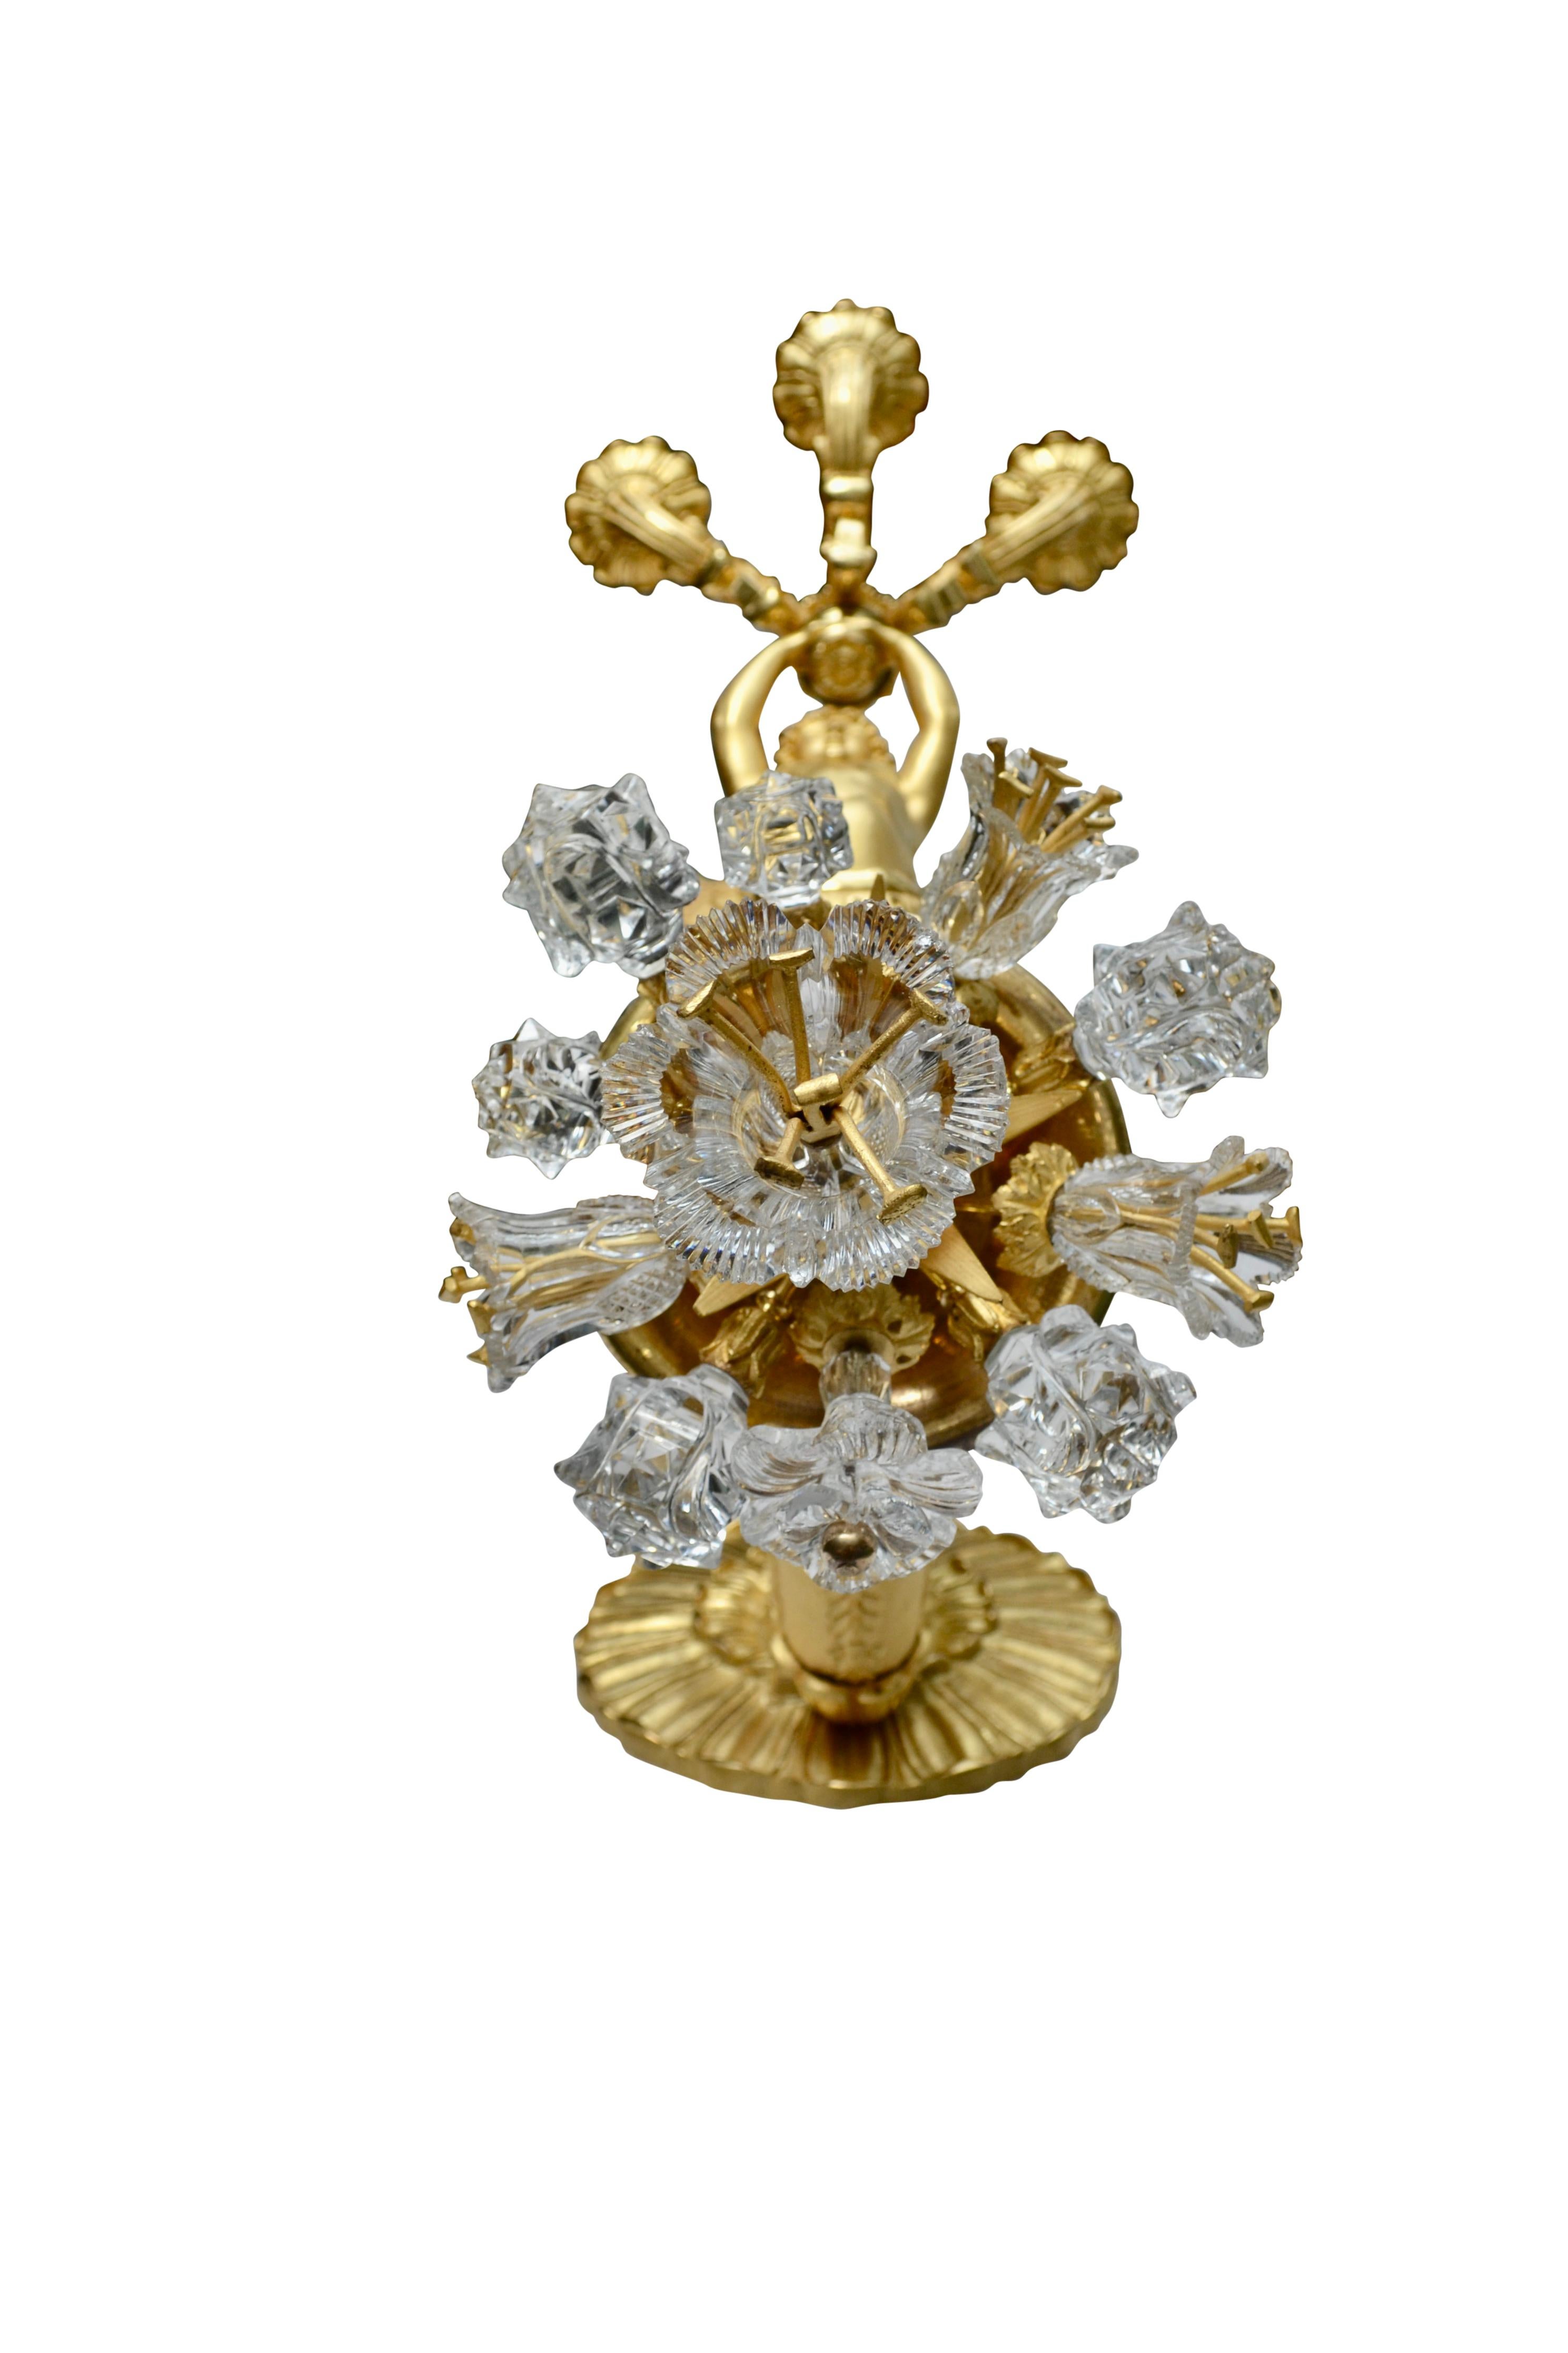 Large French Empire Gilt Bronze and Crystal Sconce Attributed to Thomire For Sale 8